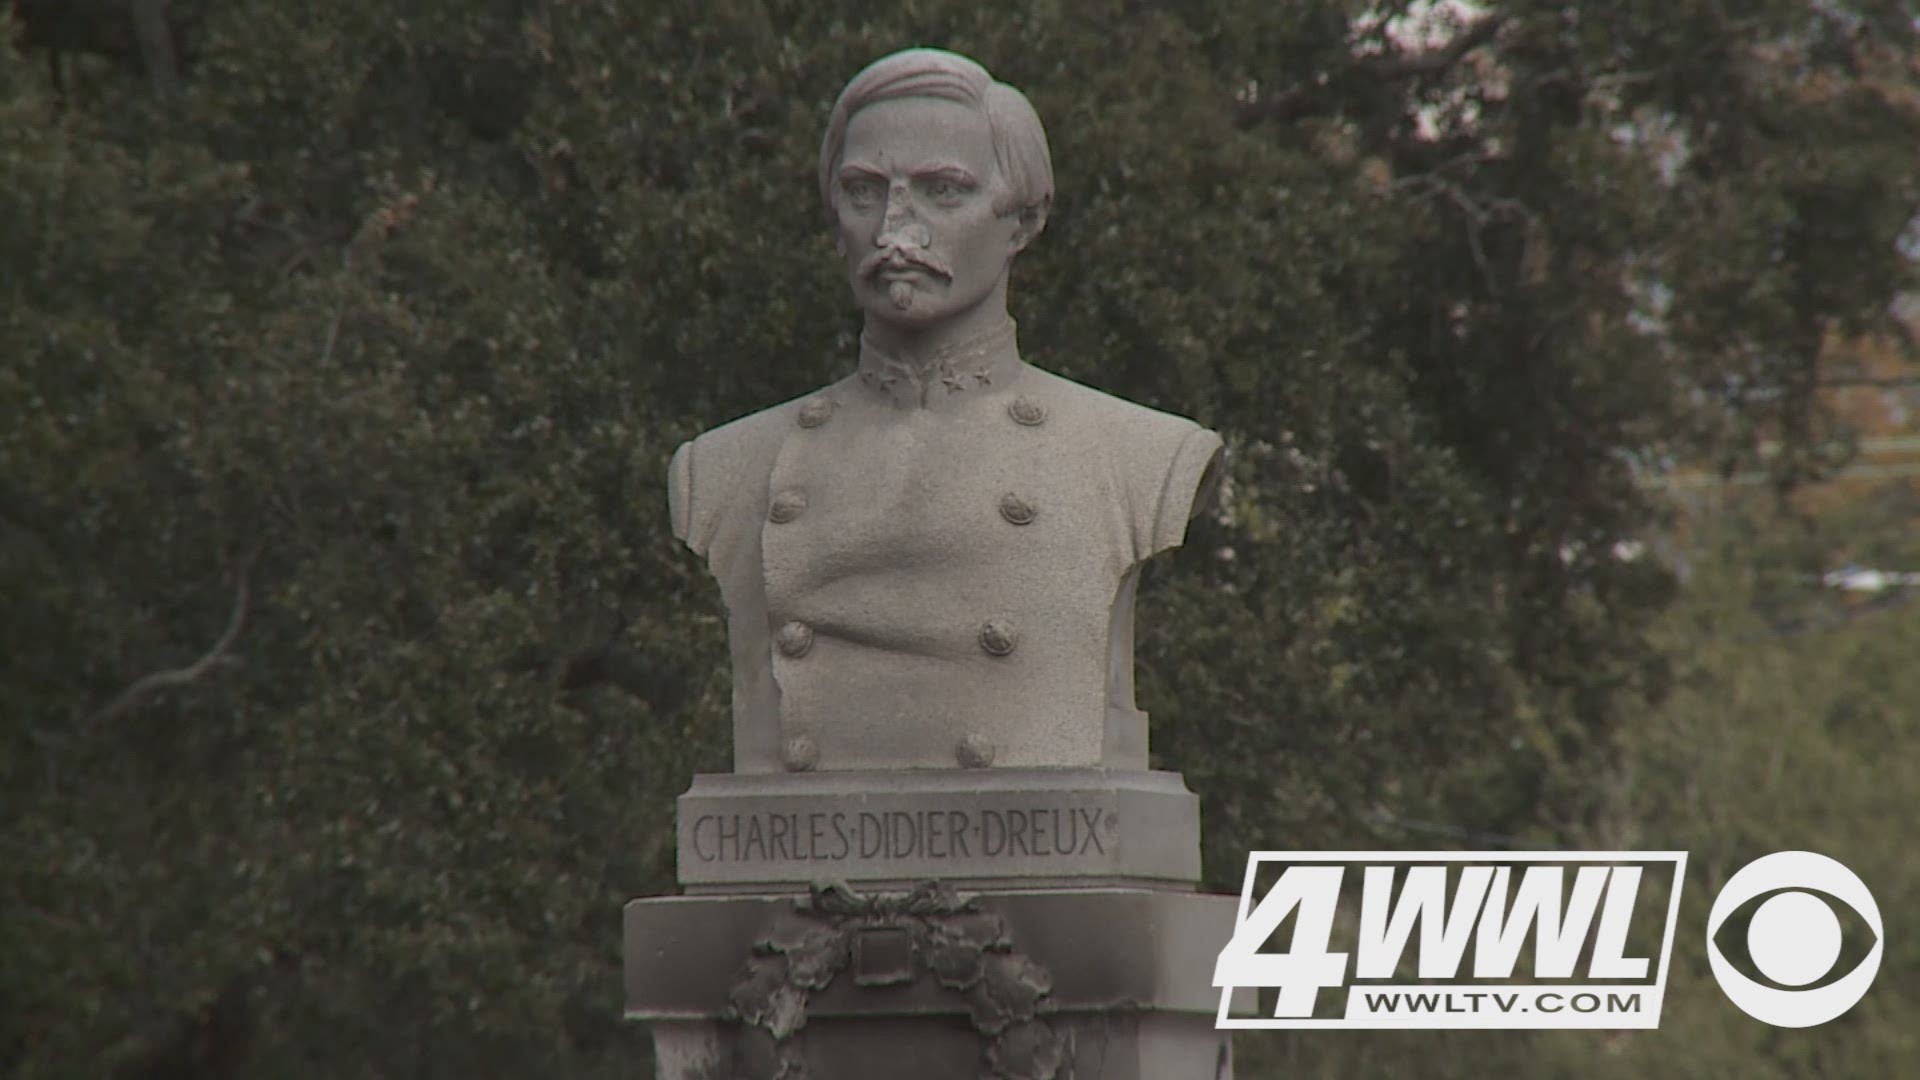 It's the second time in a year the bust of Col. Charles Didier Dreux has been vandalized.